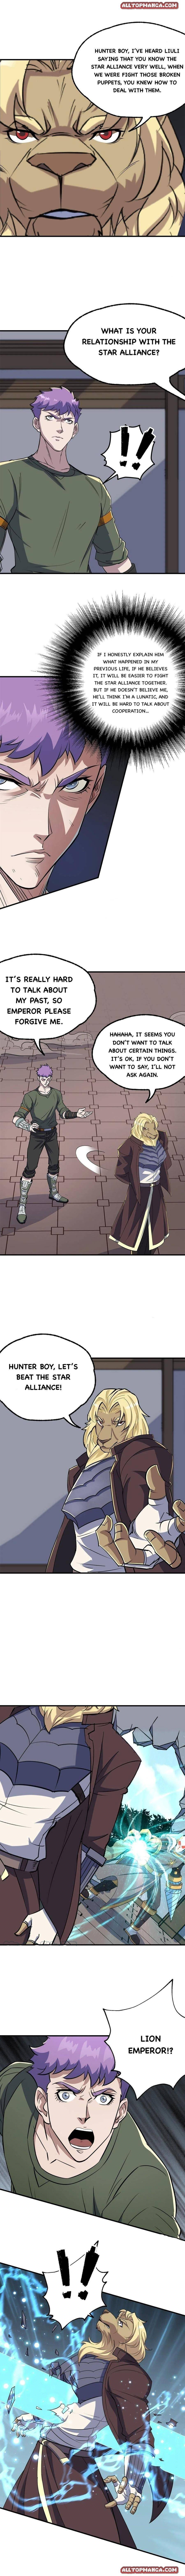 The Hunter - Page 3